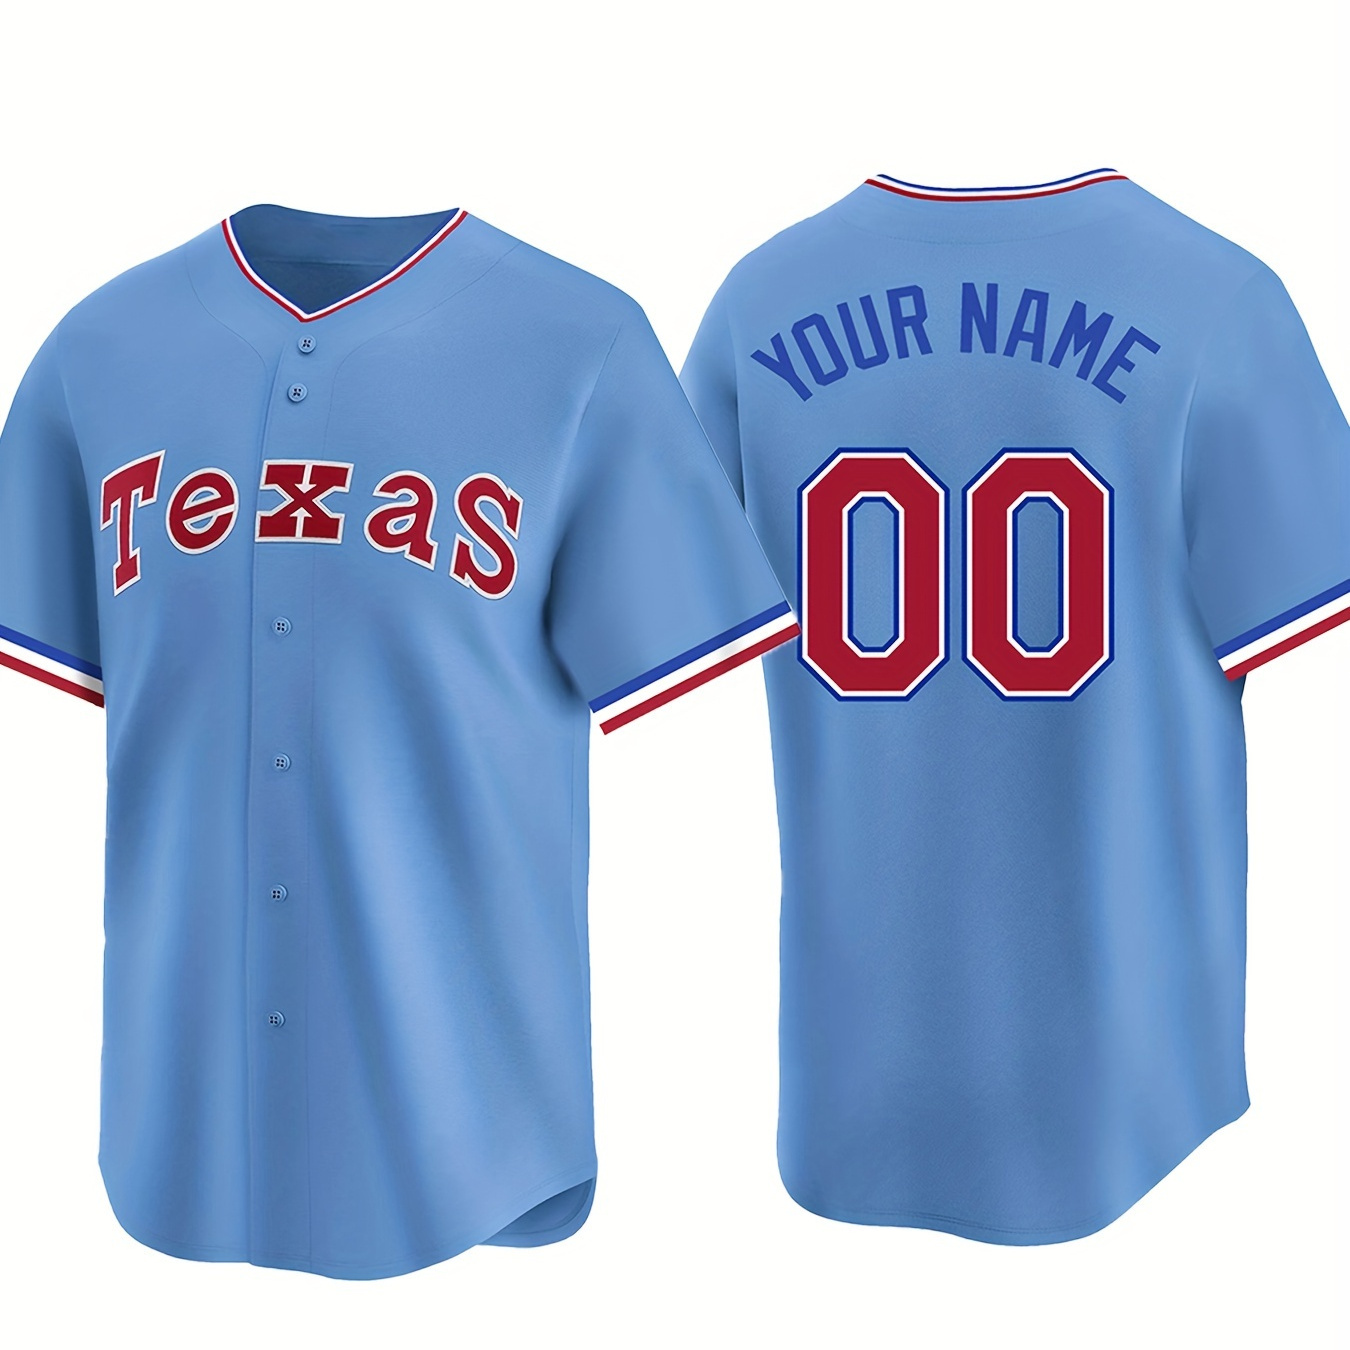 

Customized Name And Number, Men's Texas Short Sleeve V-neck Baseball Jersey, Comfy Top For Training And Competition